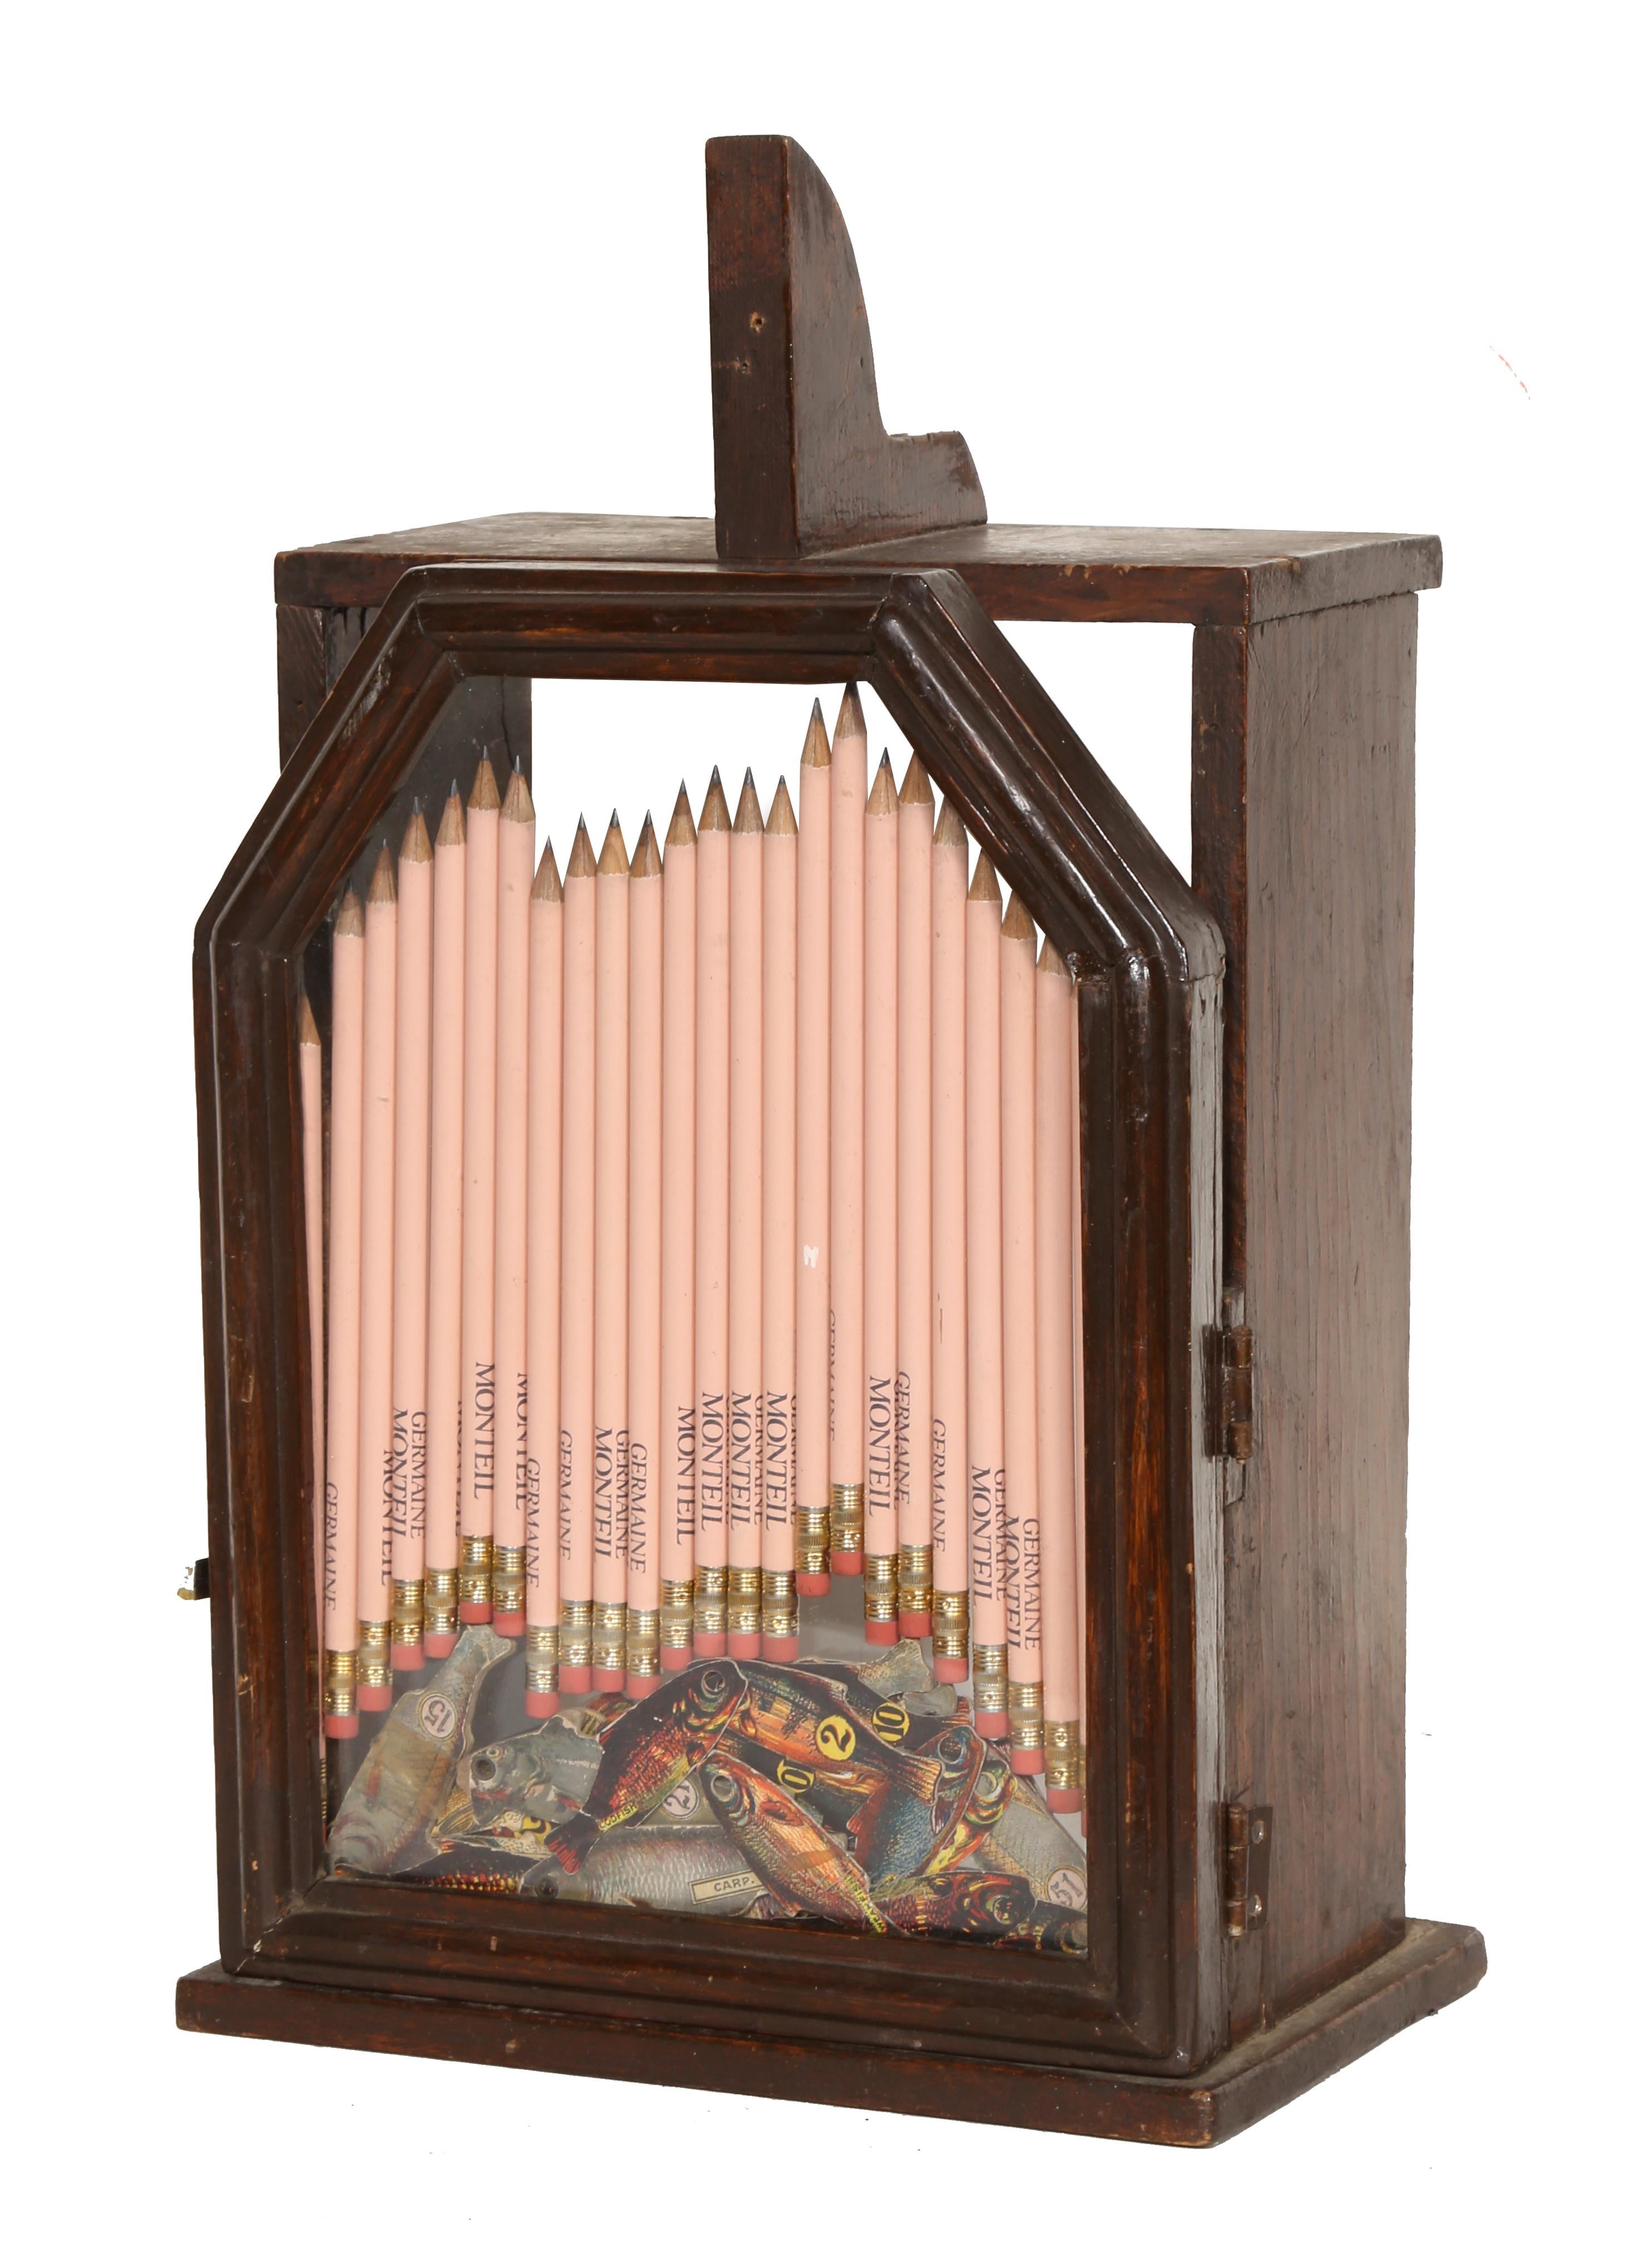 Artist: Arman
Title: Wooden box with Pencils 
Year: Mid-Late 20th Century
Medium: Mixed media, signature etched into glass
Size: 13 x 9 x 6.5 inches